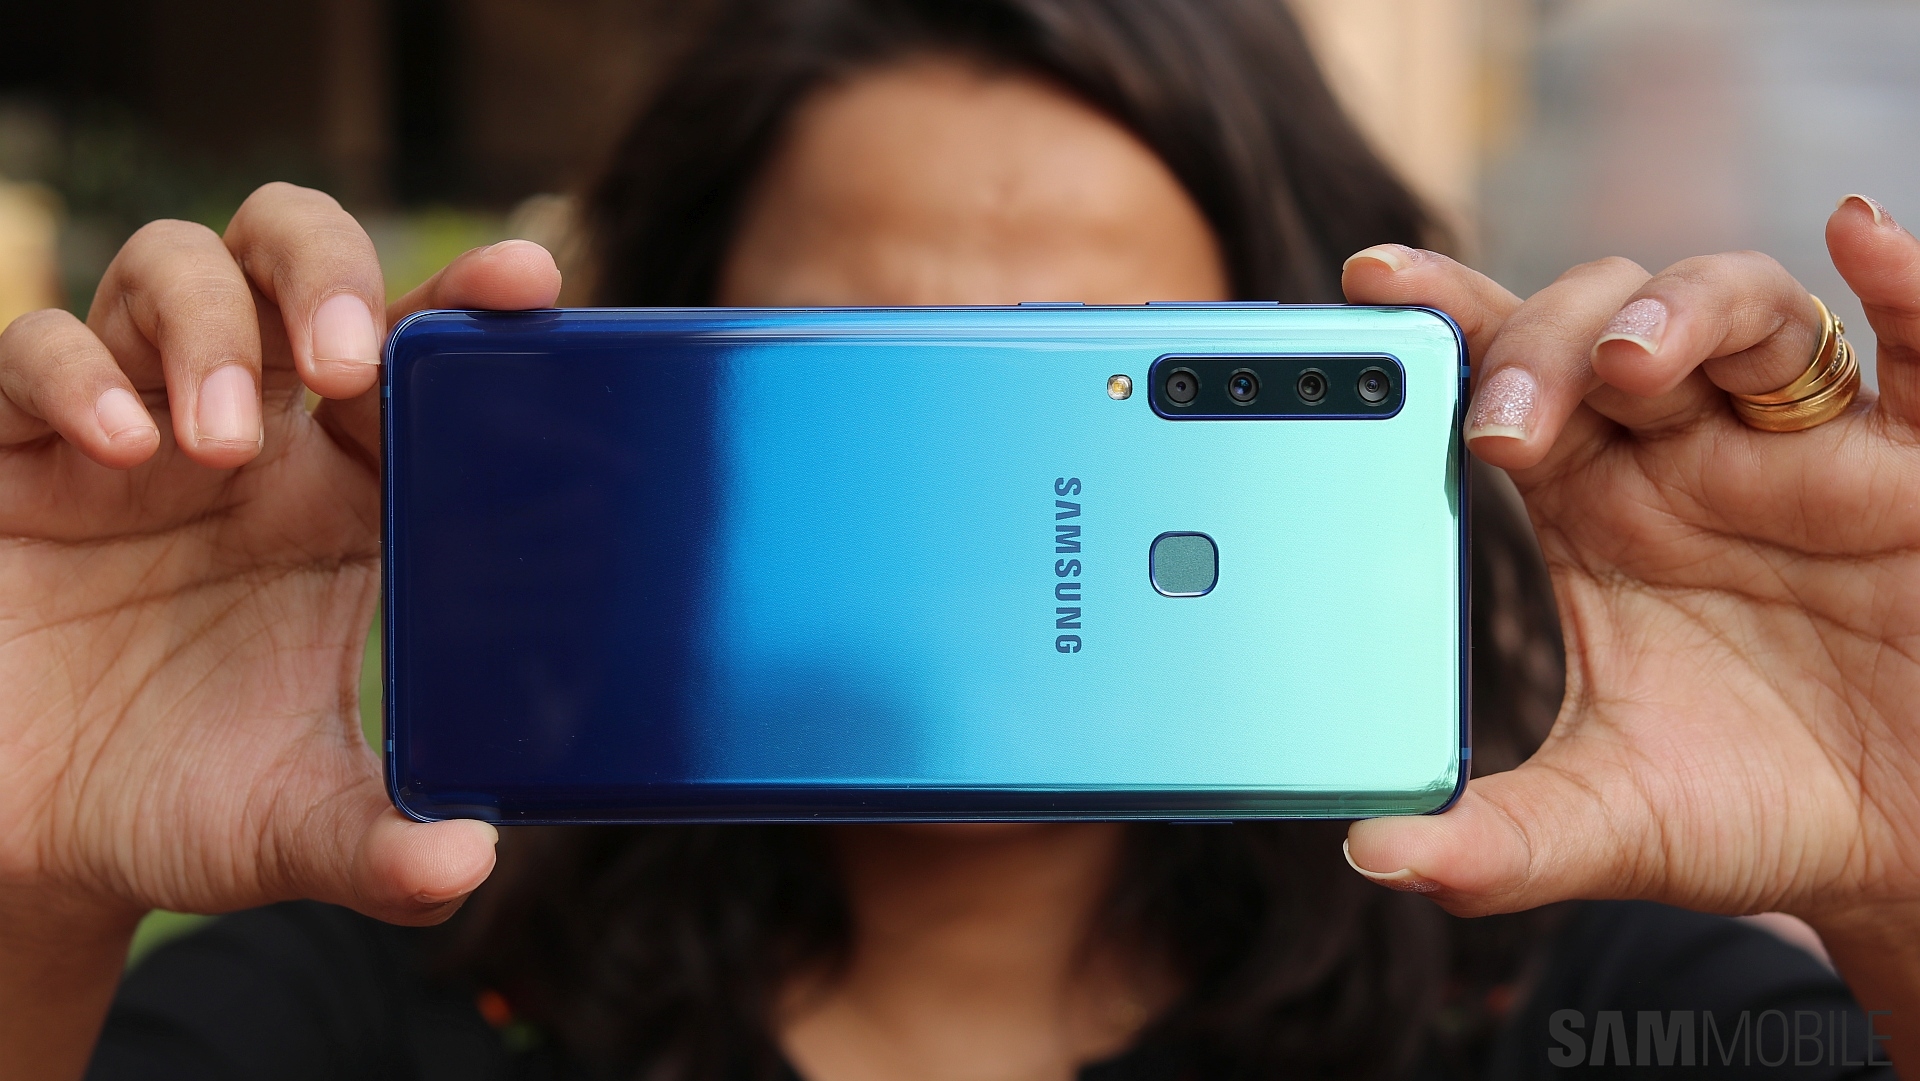 Samsung Galaxy A9 (2018) shimmers in lovely colors - CNET